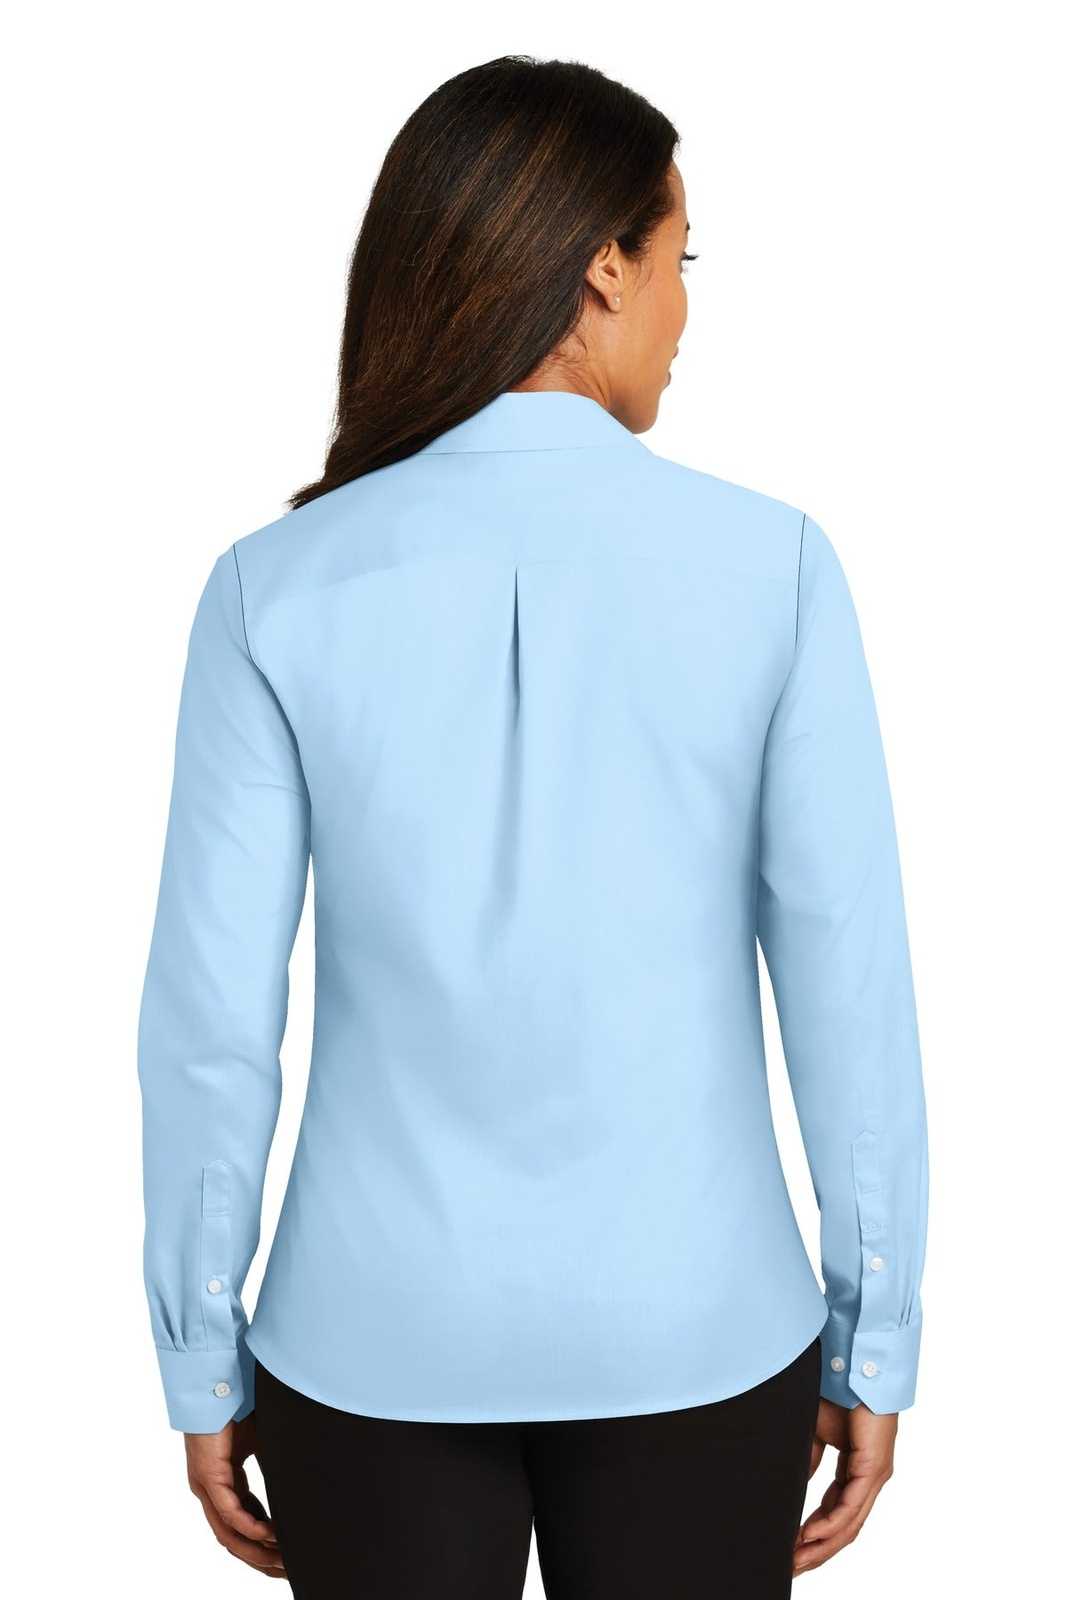 Red House RH79 Ladies Non-Iron Twill Shirt - Heritage Blue - HIT a Double - 2